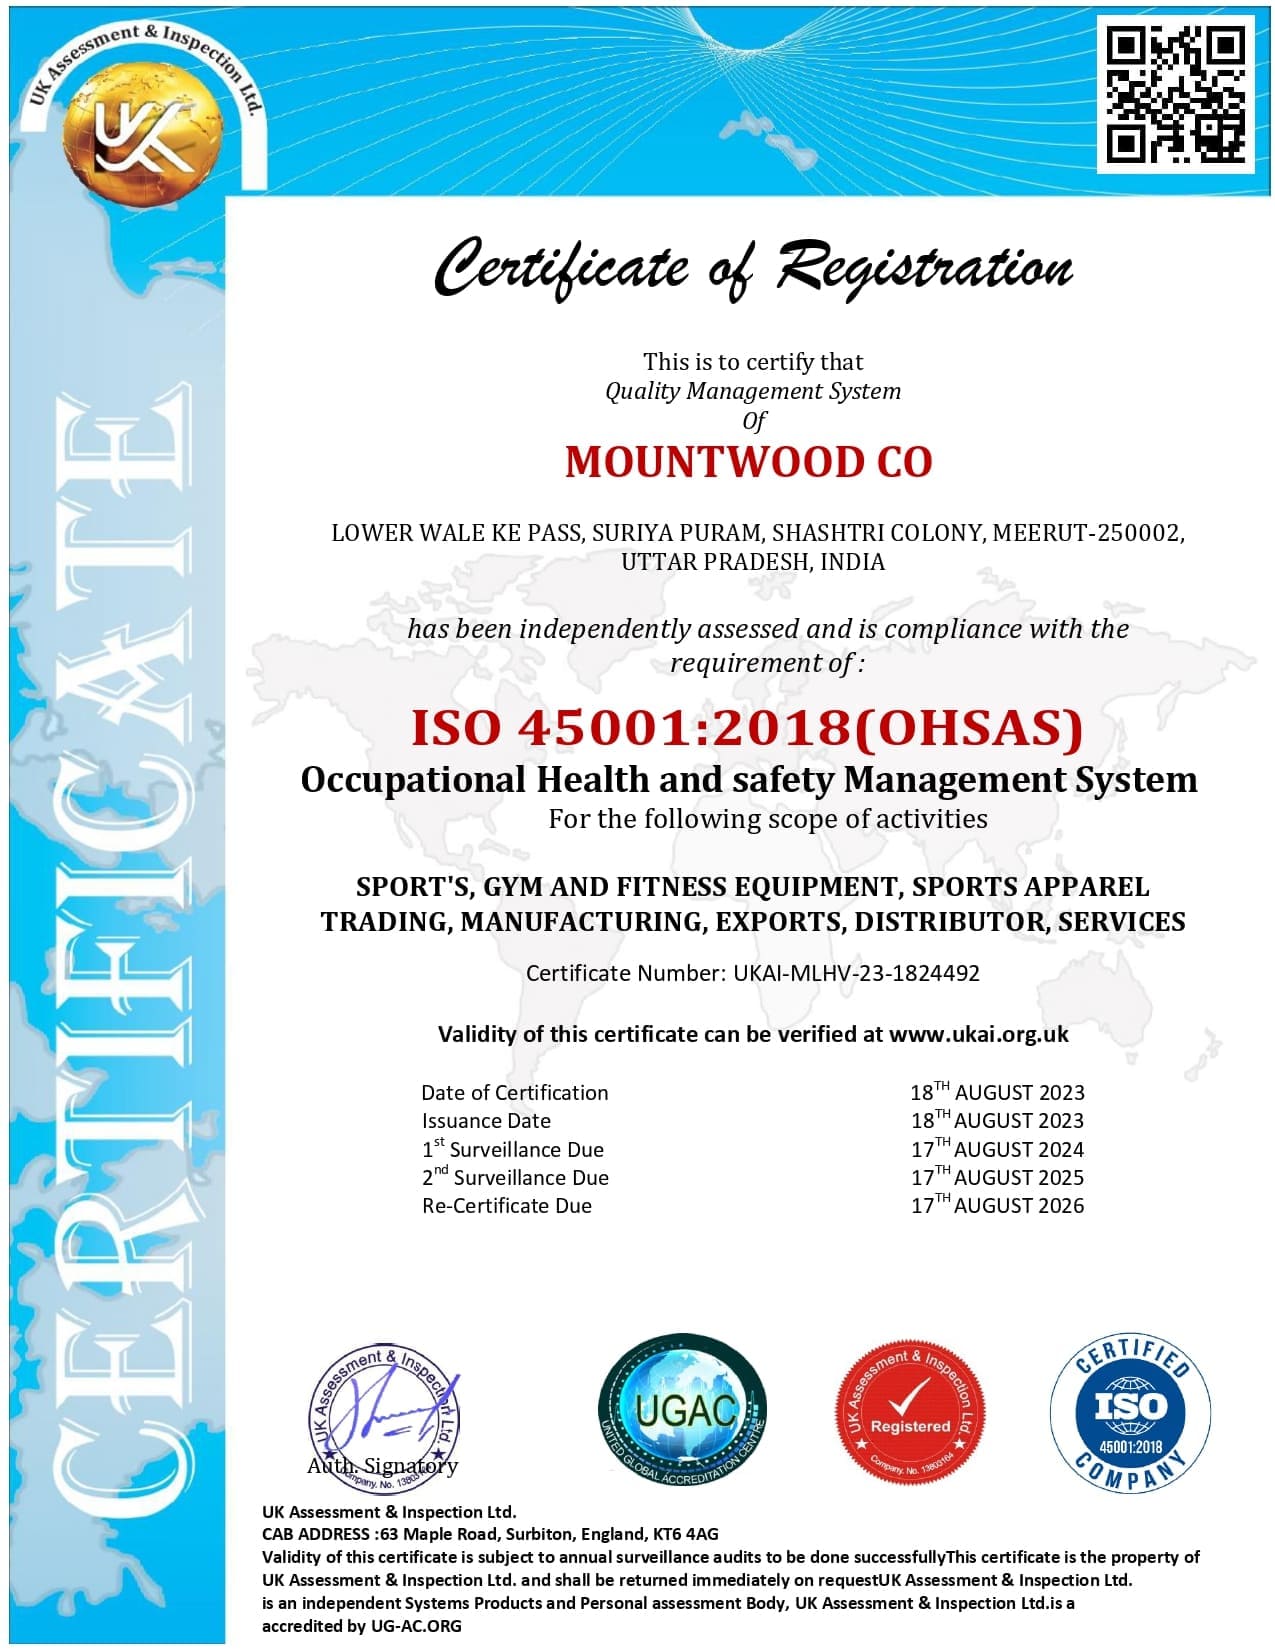 ISO 45001:2018 (OHSAS)